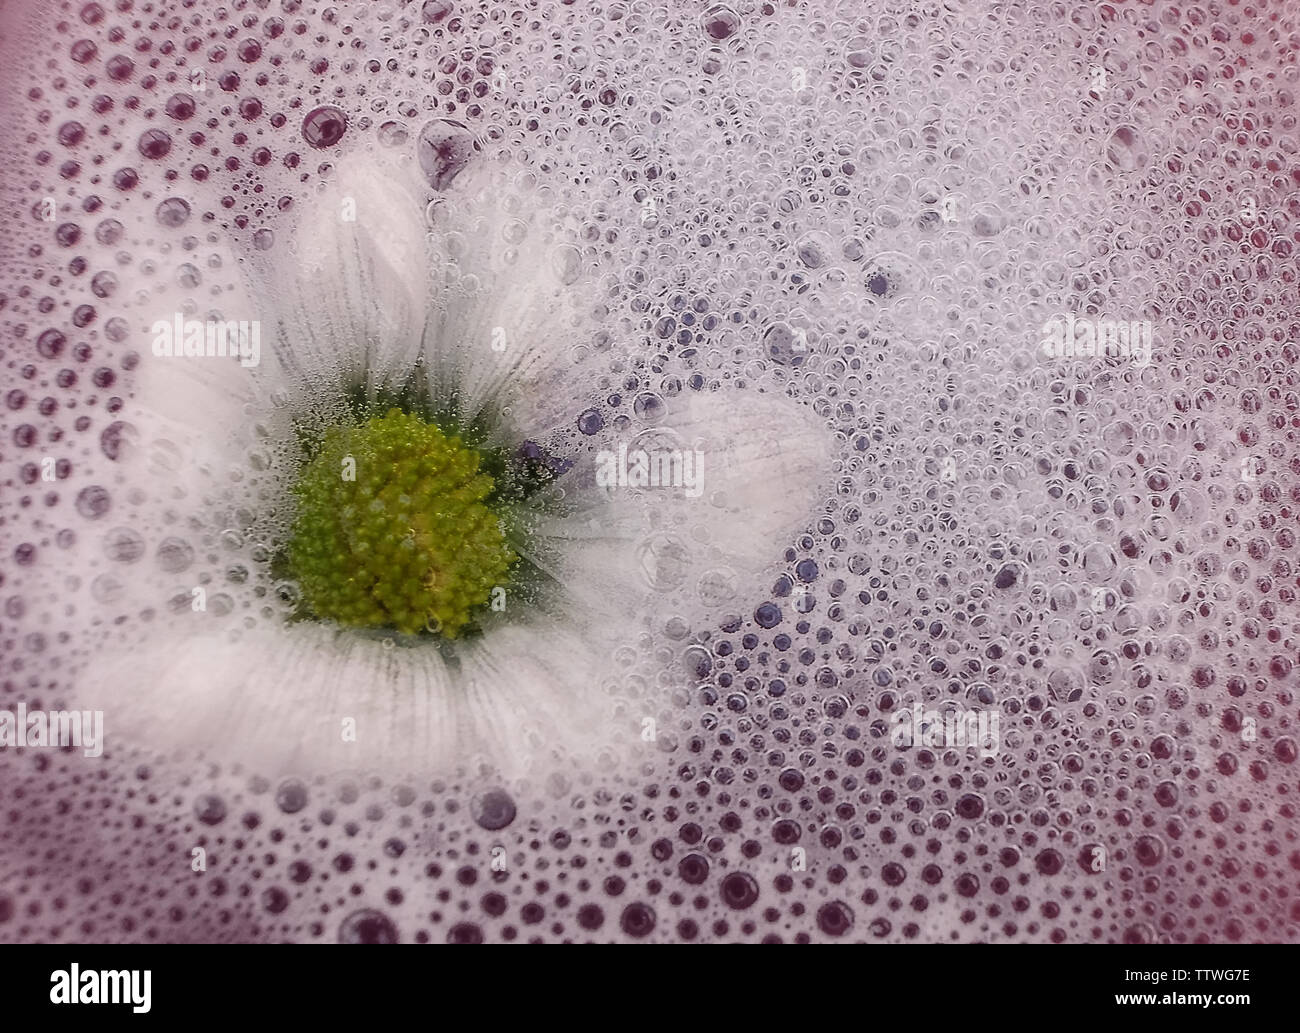 white flower head against water bubbles Stock Photo